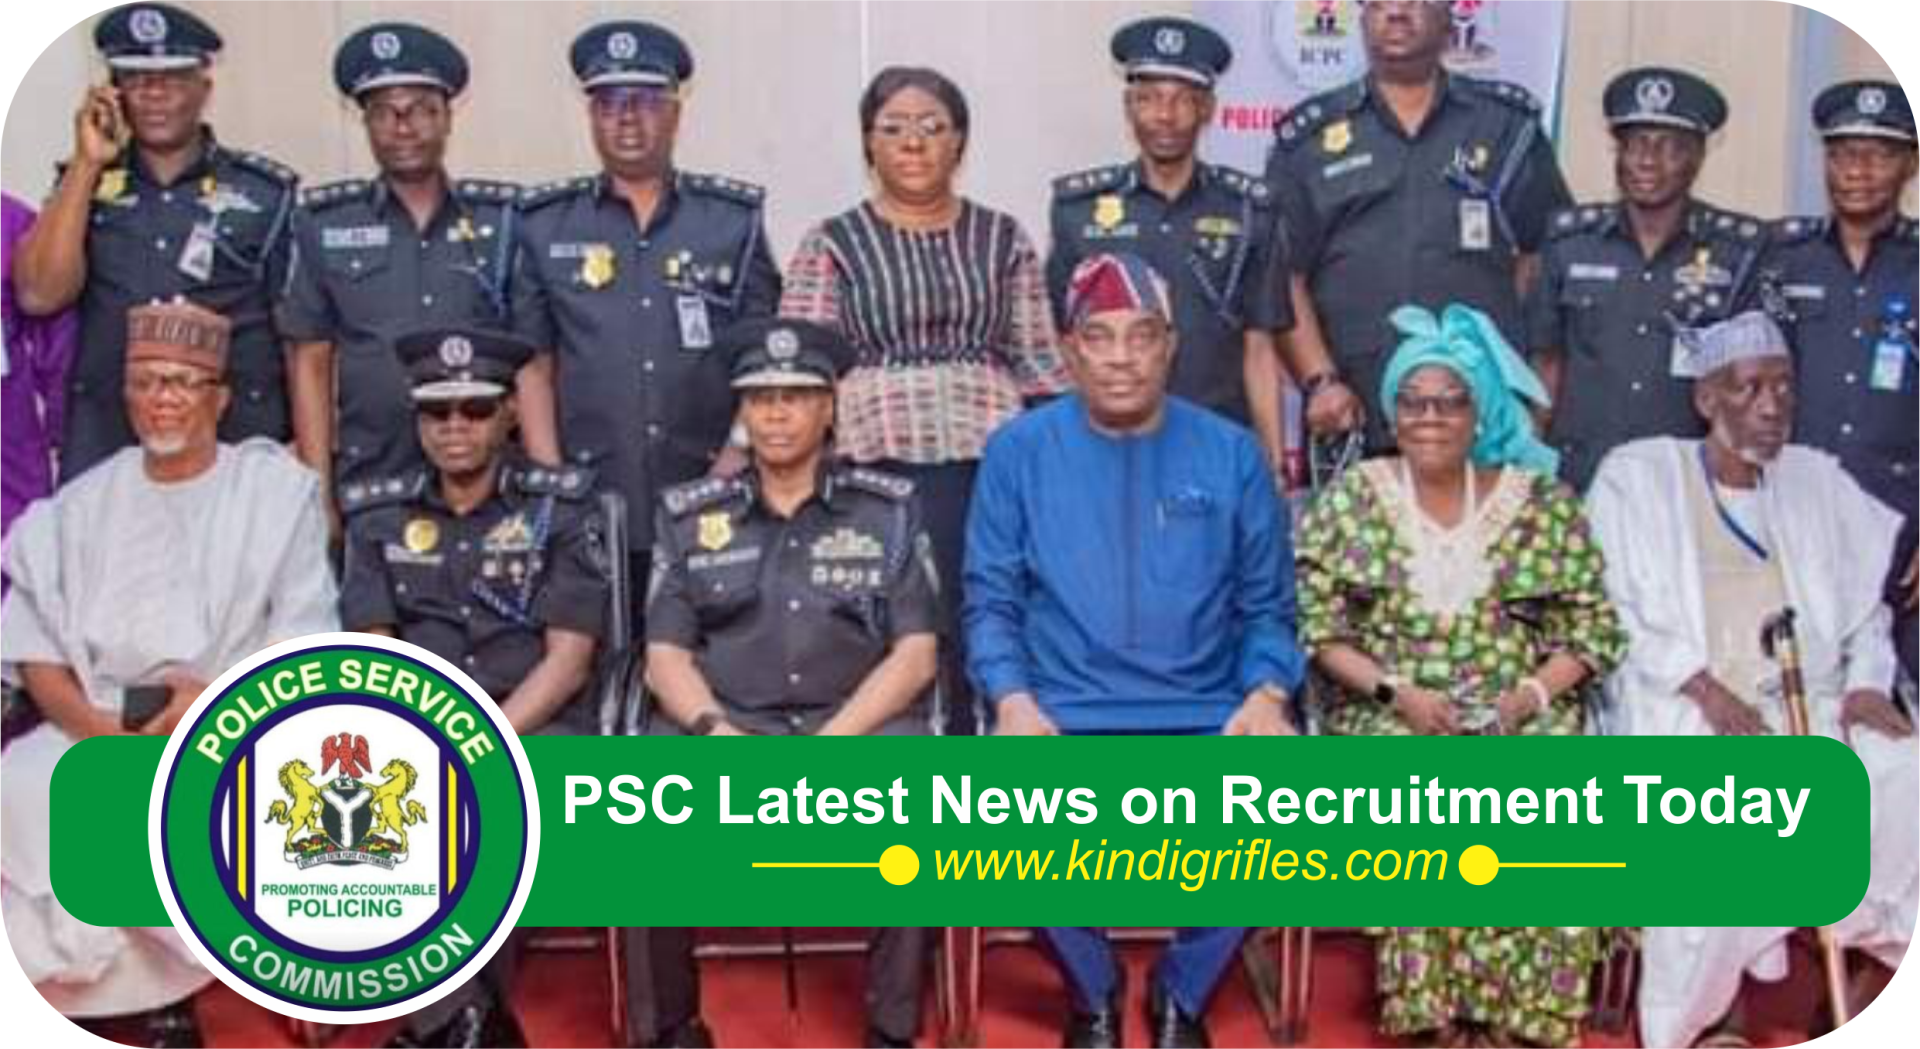 PSC Latest News on Recruitment Today